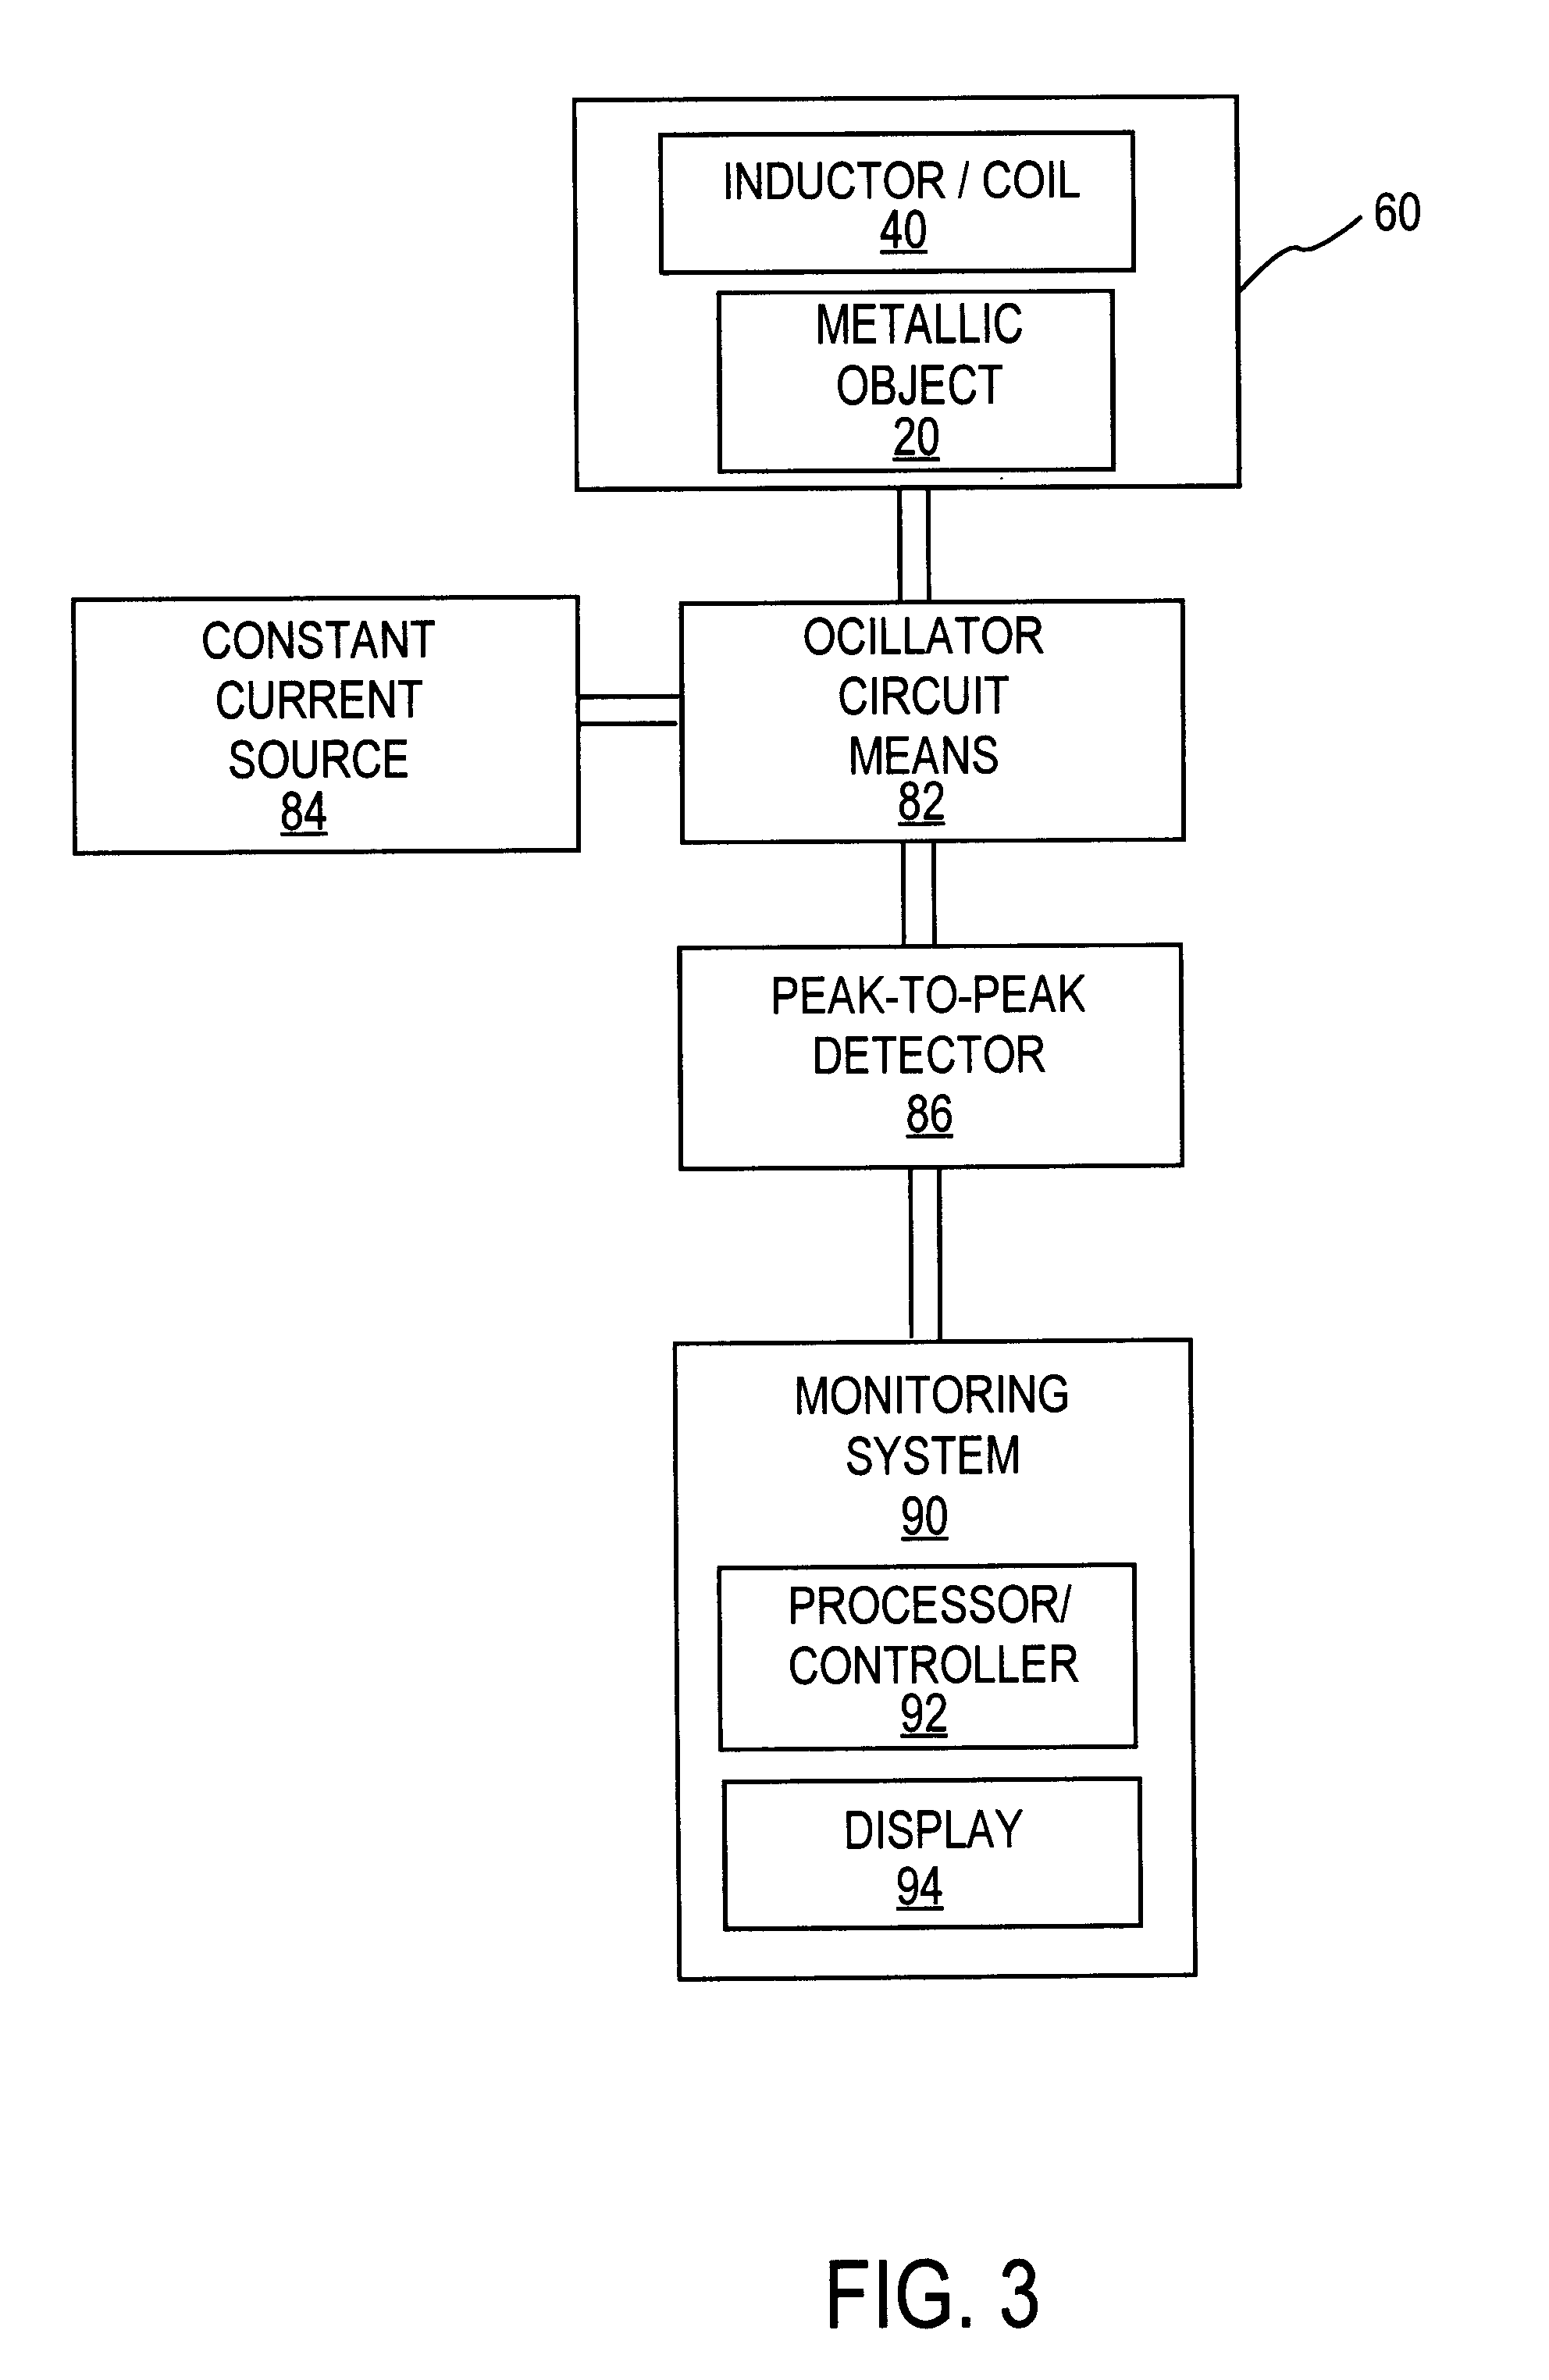 Method and apparatus for controlling the temperature stability of an inductor using a magnetically coupled metallic object